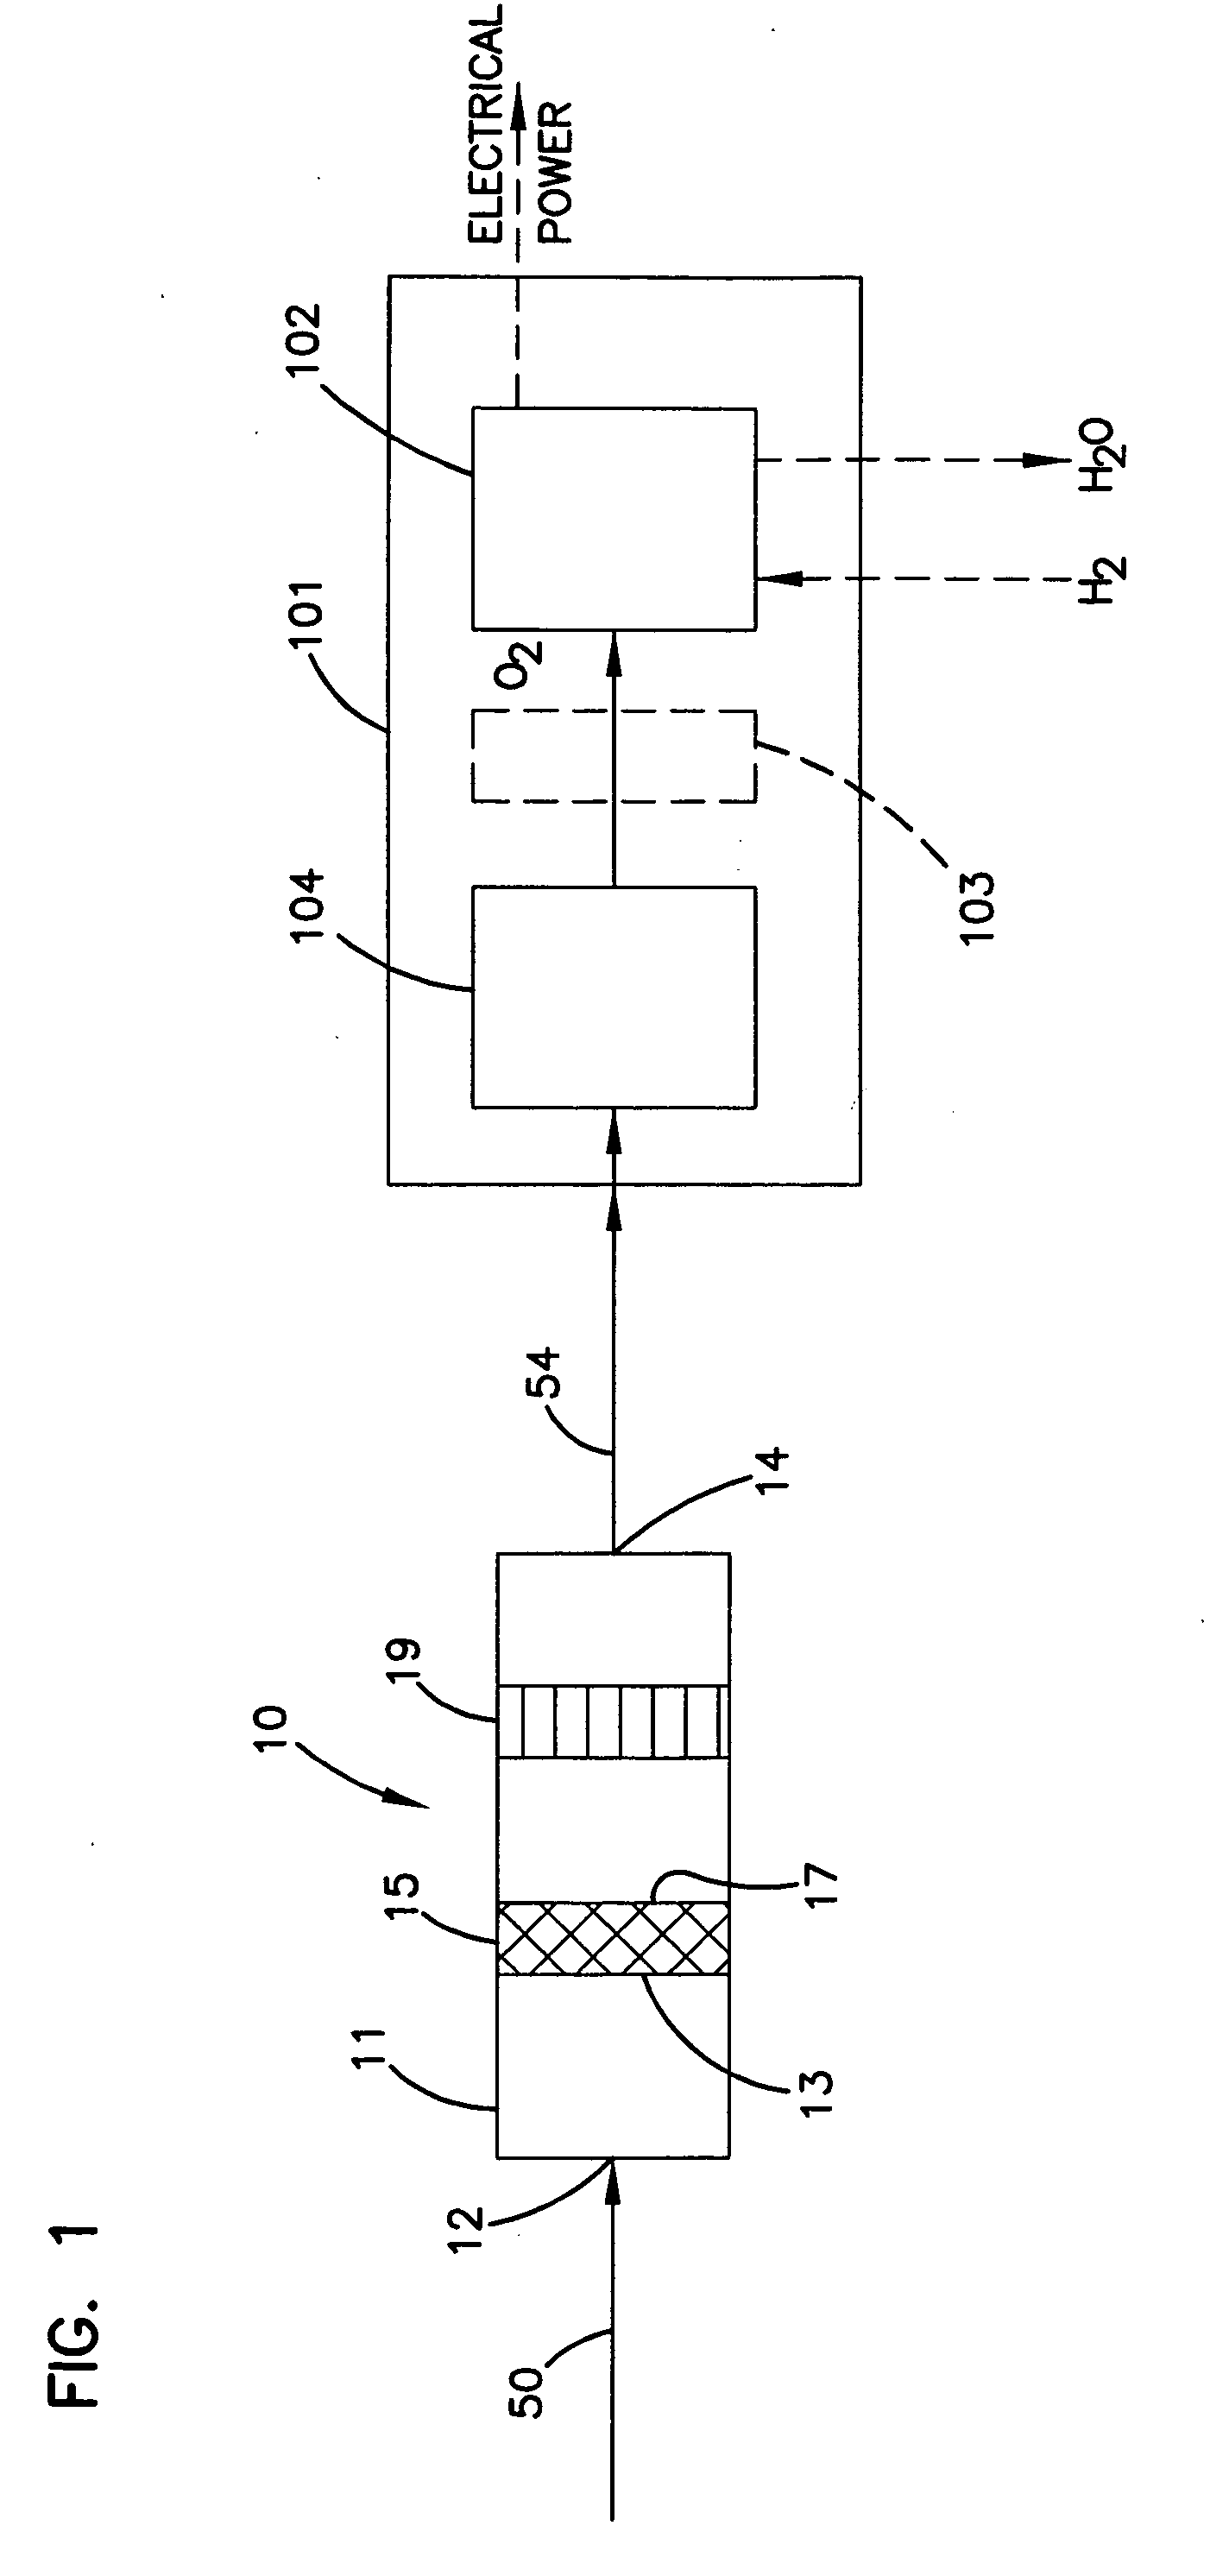 Filter assemblies and systems for intake air for fuel cells